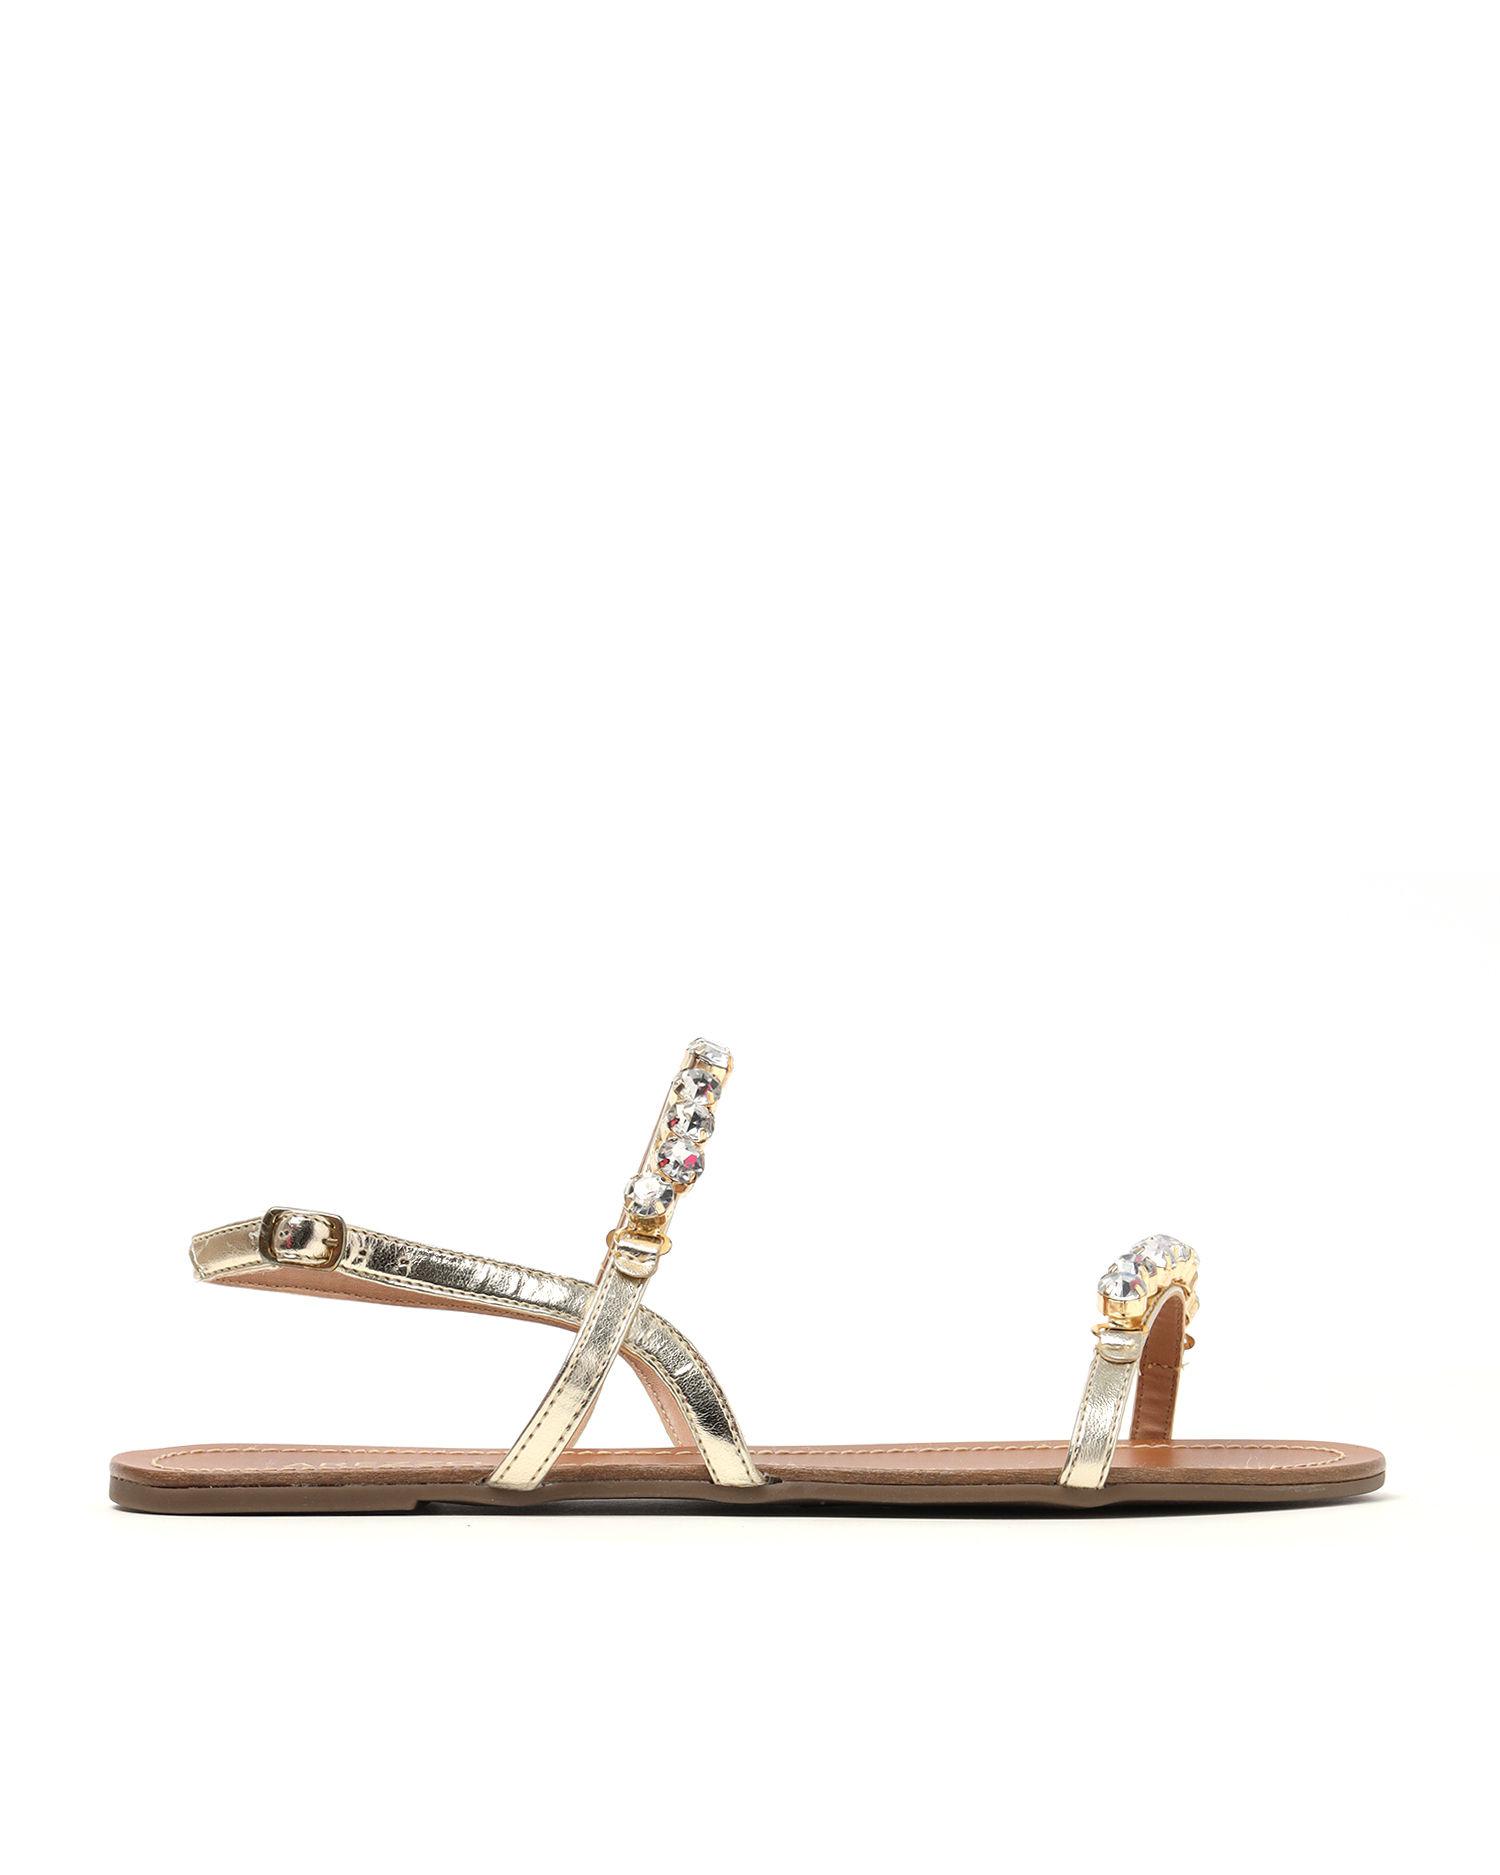 Crystal-embellished sandals by AREZZO